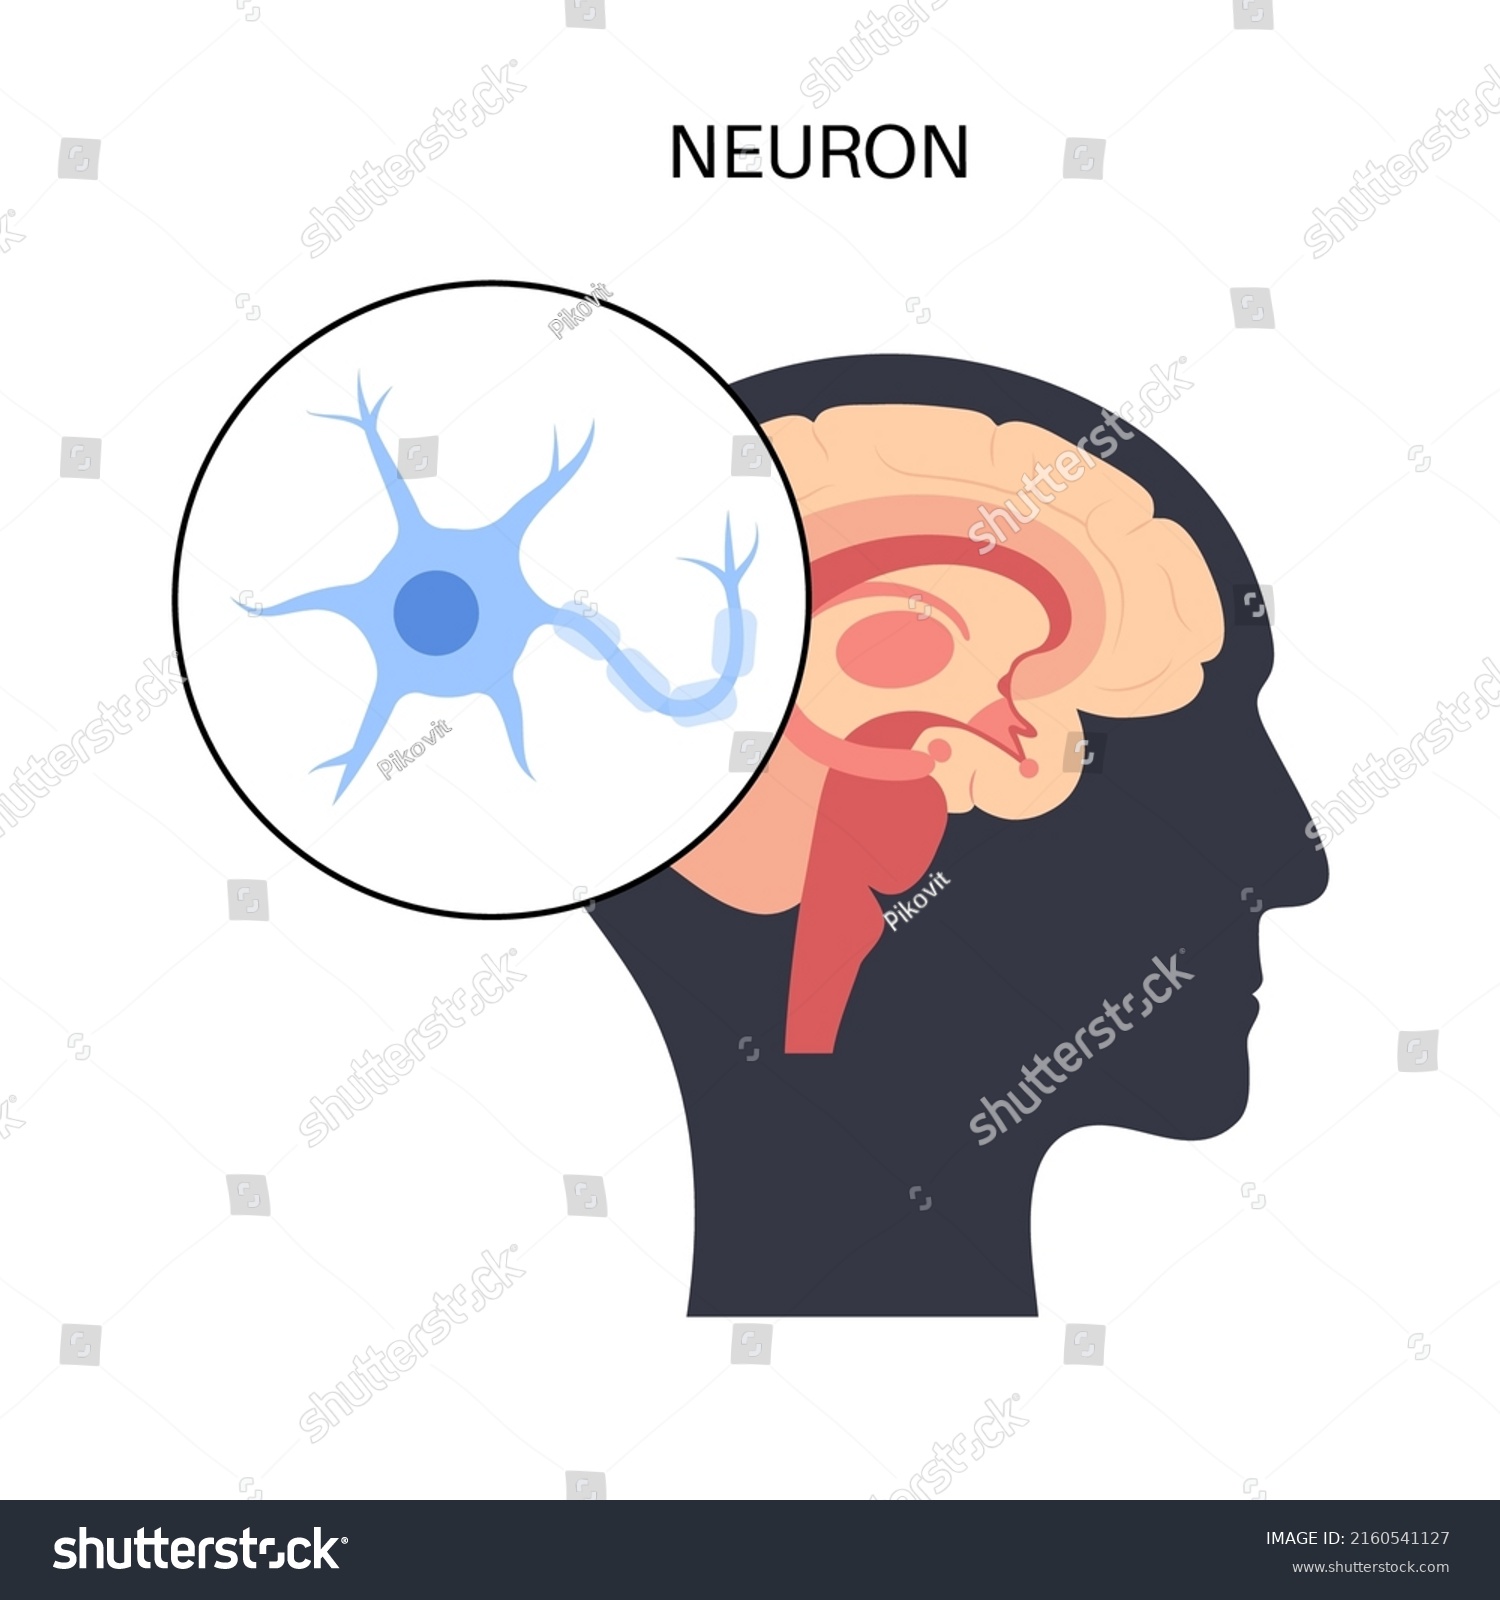 SVG of Anatomy of a neuron. Brain activity in the human body concept. Dendrites, nucleus, axon terminal and myelin sheath medical poster flat vector illustration for clinic or education. svg